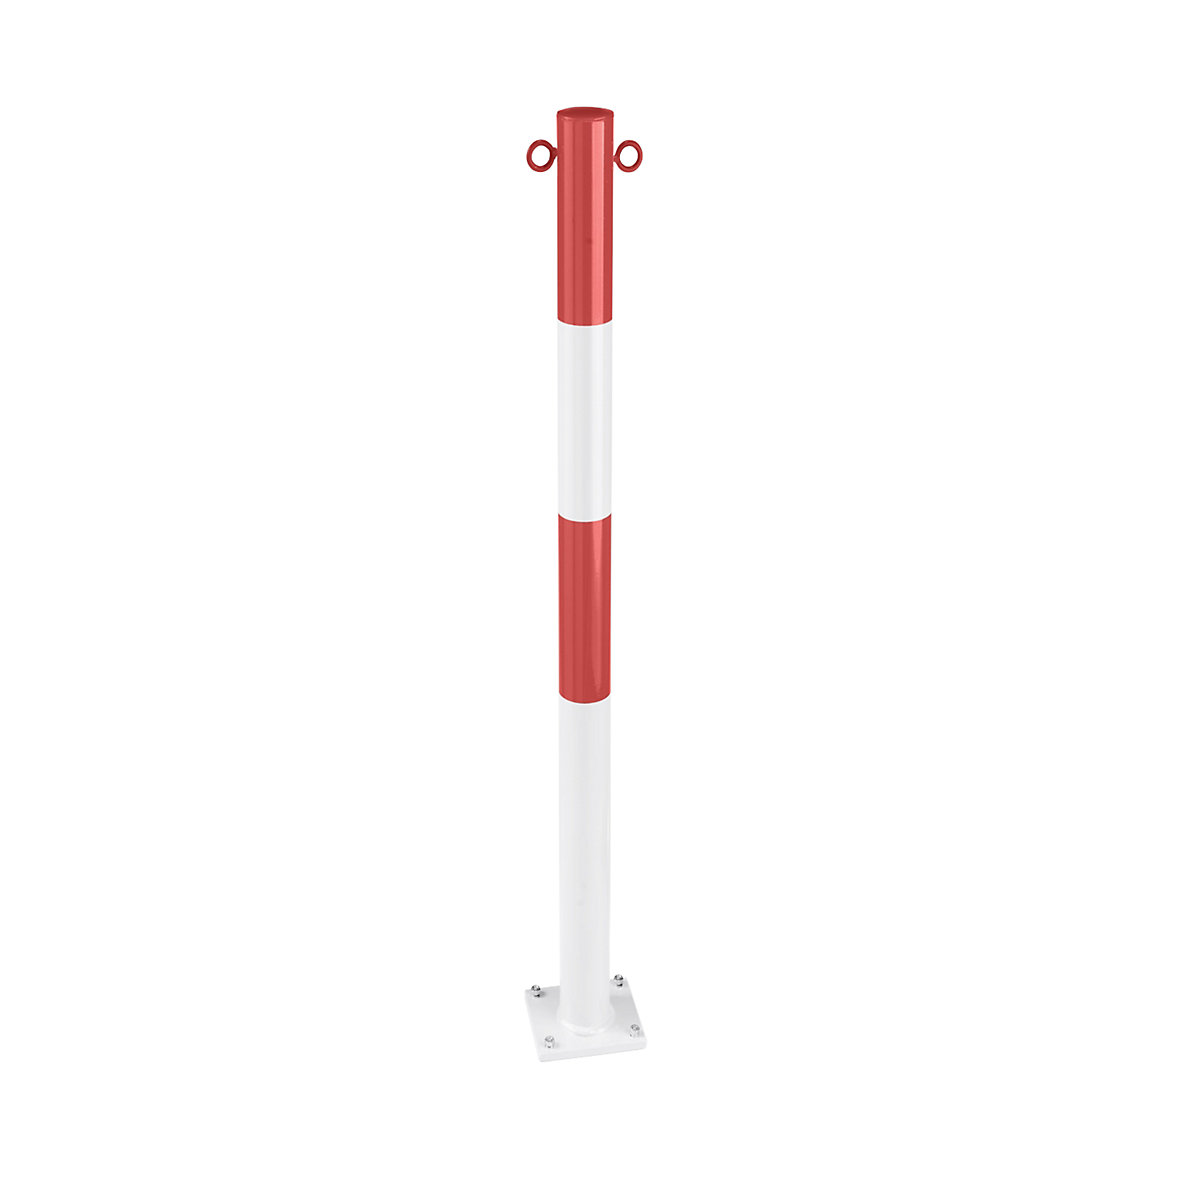 Barrier post made of tubular steel, for bolting in place, Ø 60 mm, red / white, zinc plated and painted-2